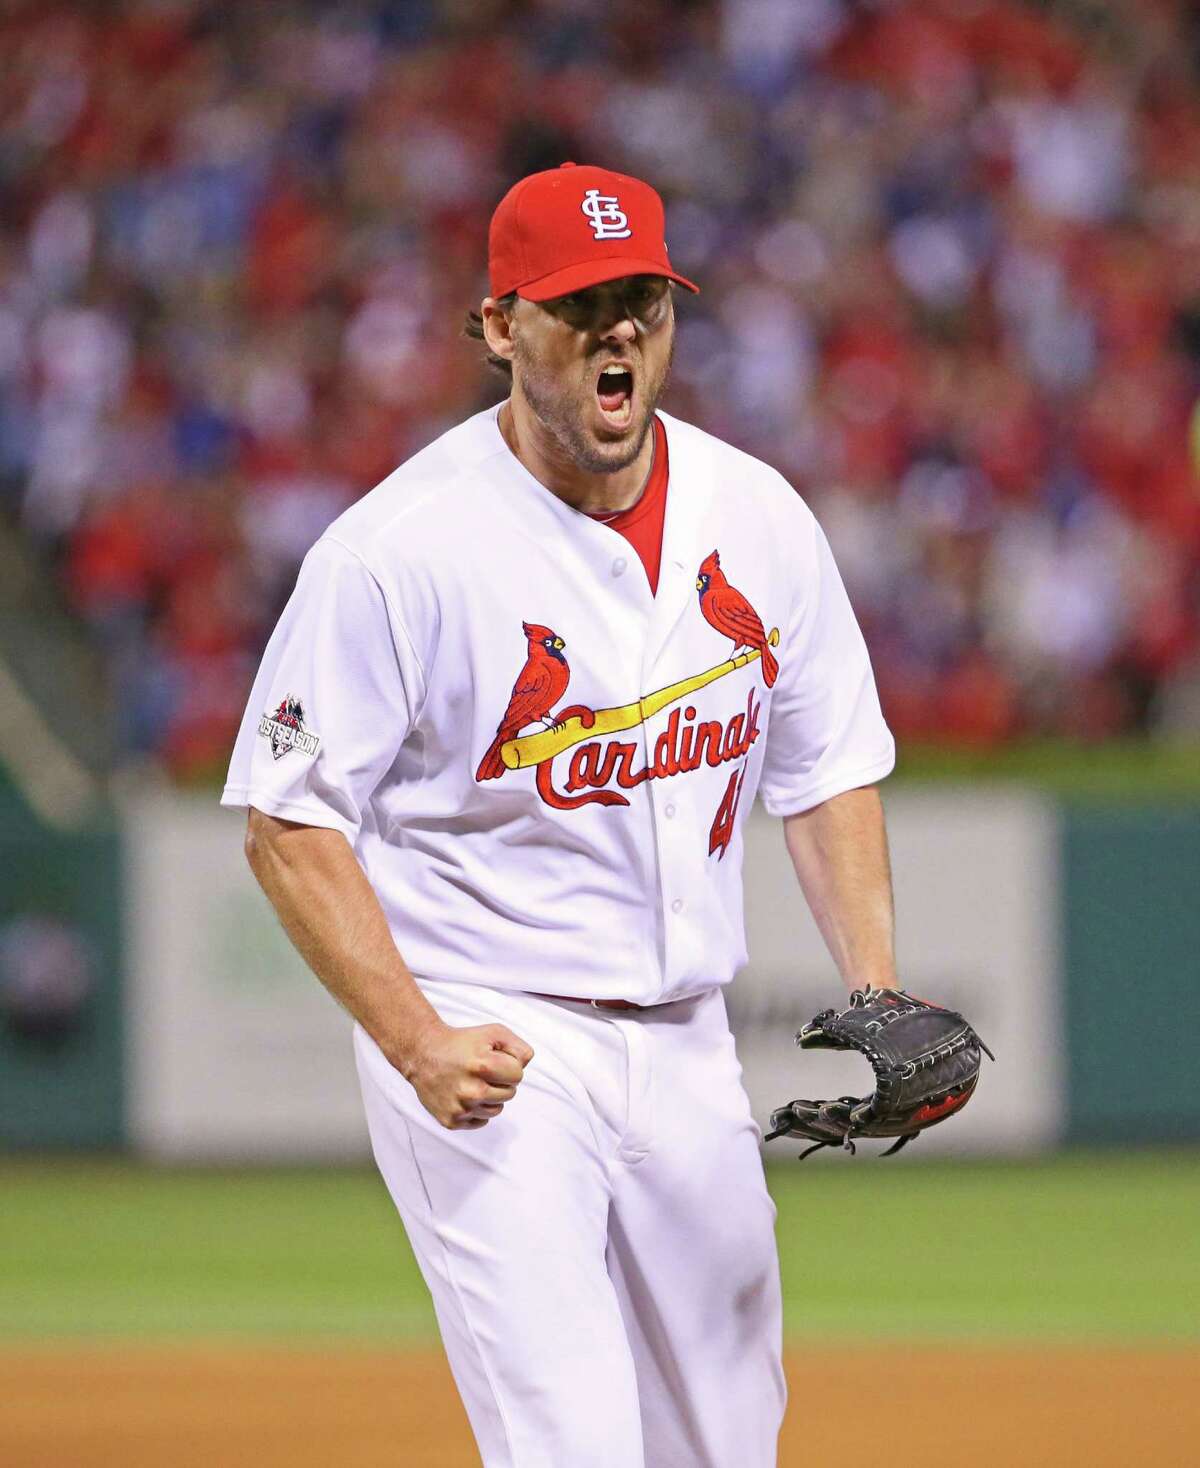 17. John Lackey, RHP, St. Louis Cardinals It wasn't long ago that Lackey appeared done, but at 37 years old, he somehow put together one of the best seasons of his career last year, going 13-10 with a 2.77 ERA. He's a Texas guy and his postseason experience might be valuable in the middle of the rotation for a team like the Astros or Rangers.